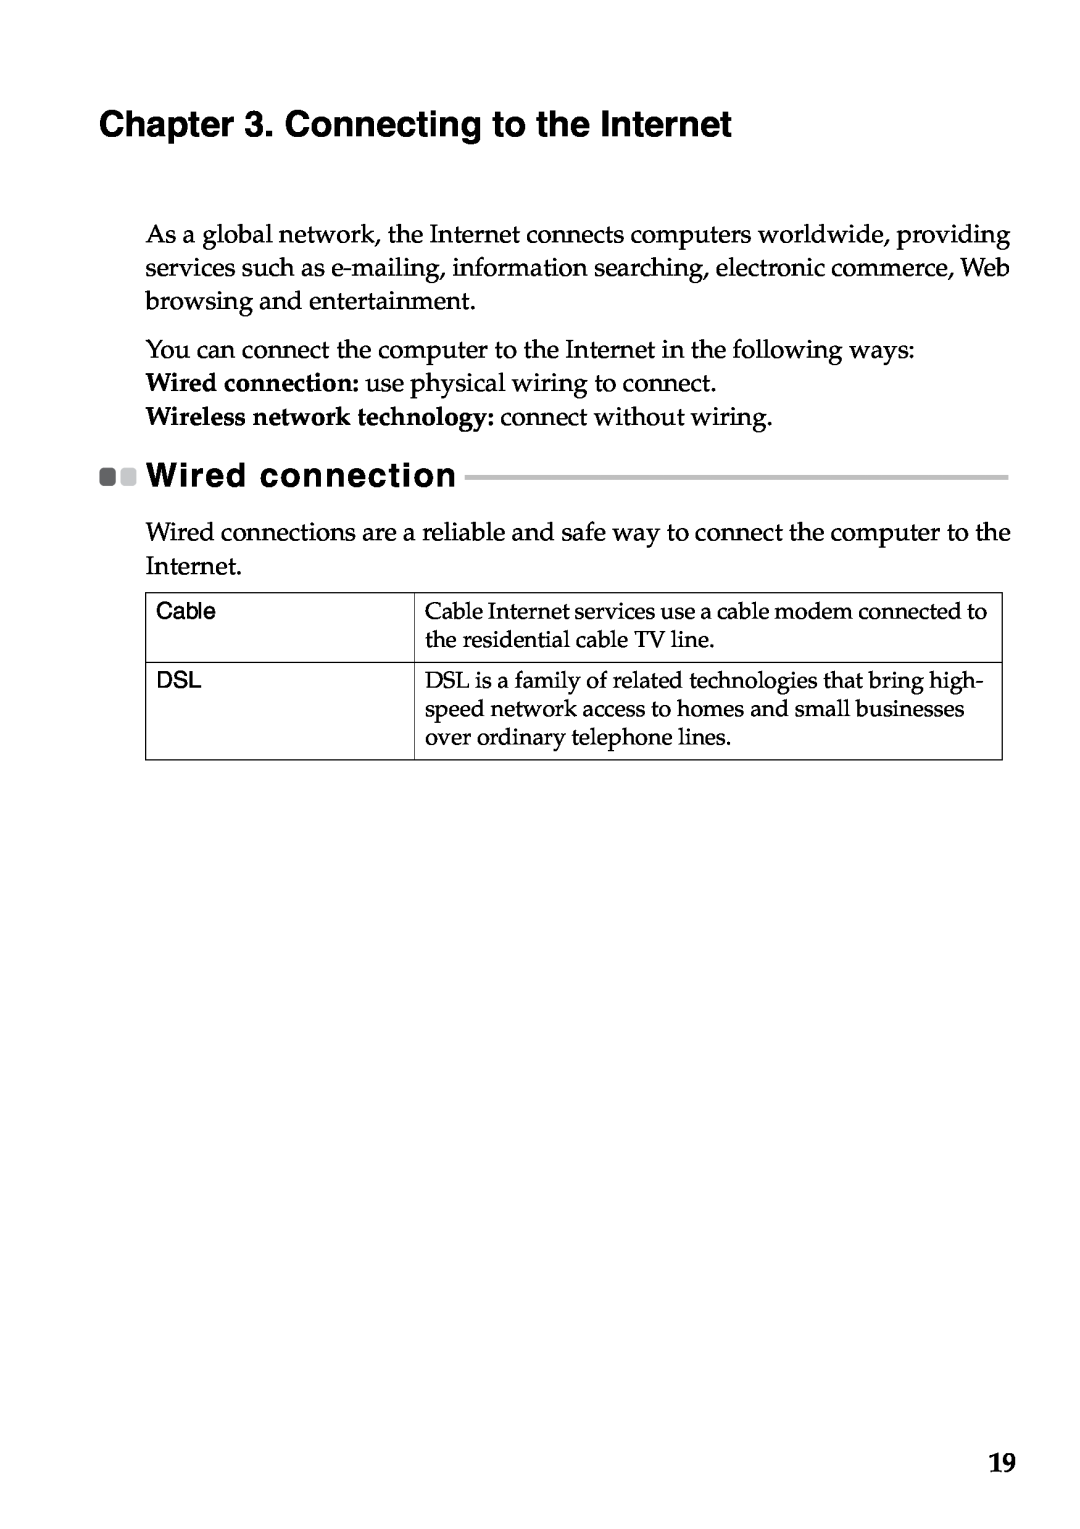 Lenovo V360 manual Connecting to the Internet, Wireless network technology connect without wiring, Wired connection 